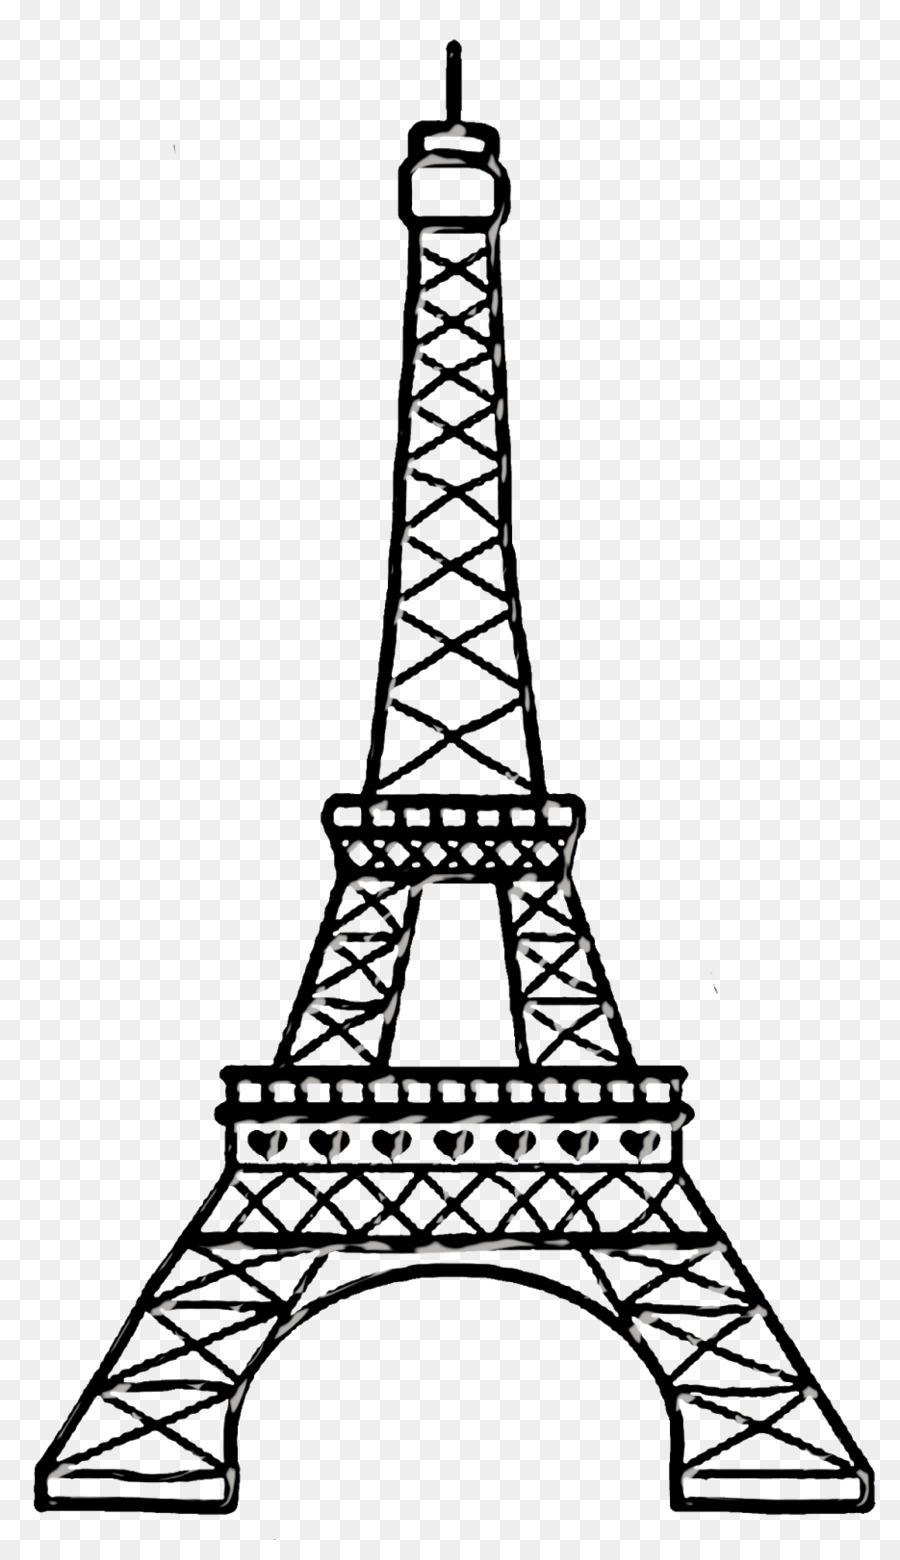 Eiffel Tower Paper Drawing Clip art - eiffel png download - 935*1600 - Free Transparent Eiffel Tower png Download.